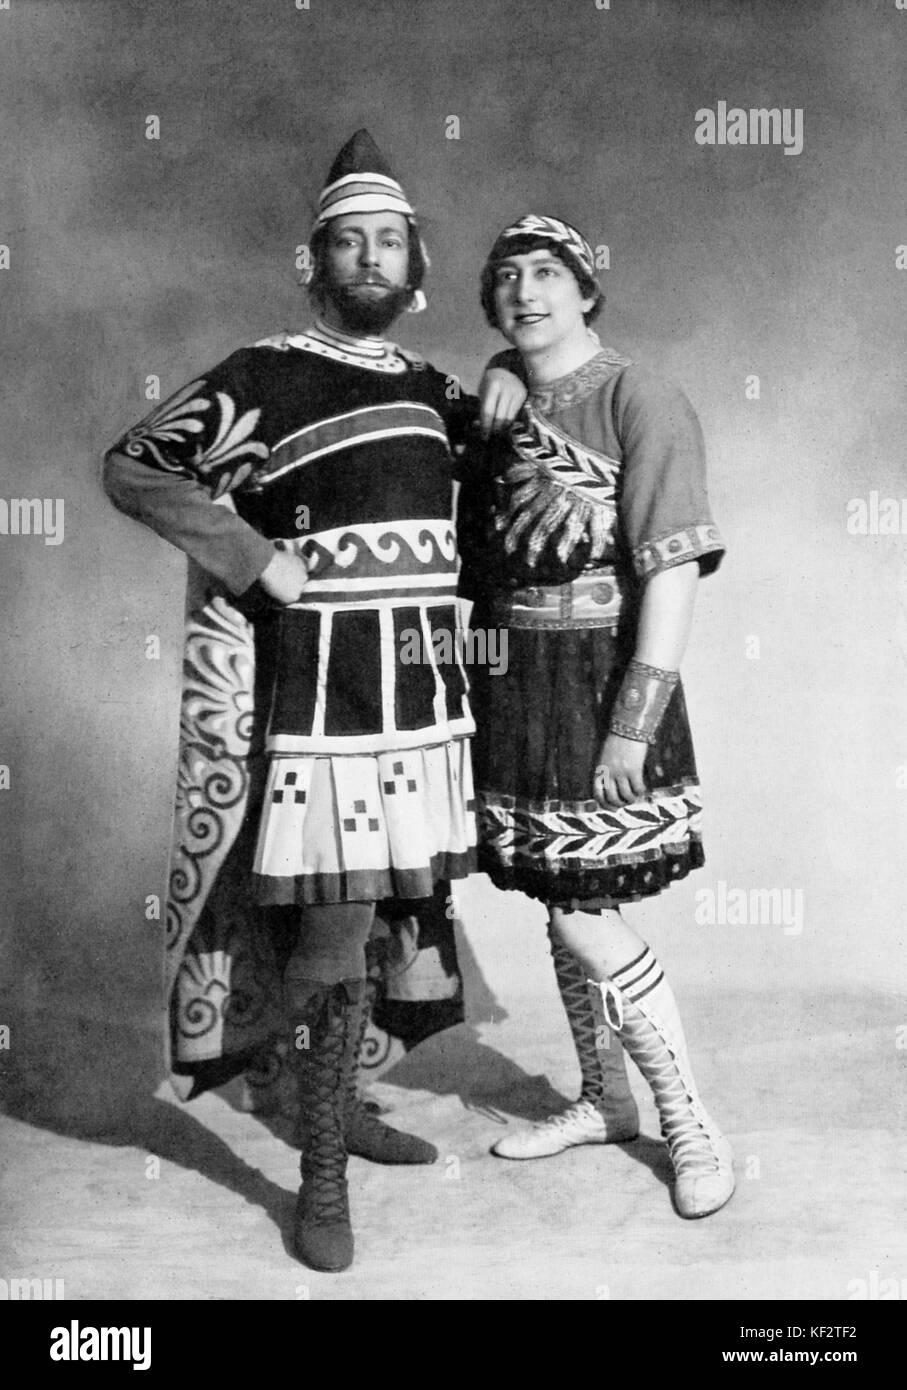 Eurymache played by Danges and Antinous played by Tirmont from the opera ' Penelope ' by Gabriel Fauré. Performance at Theatre des Champs Elysees, Paris,  1913. Photo by Gerschel. GF: French composer, 12th May 1845 - 4th November 1924. Stock Photo